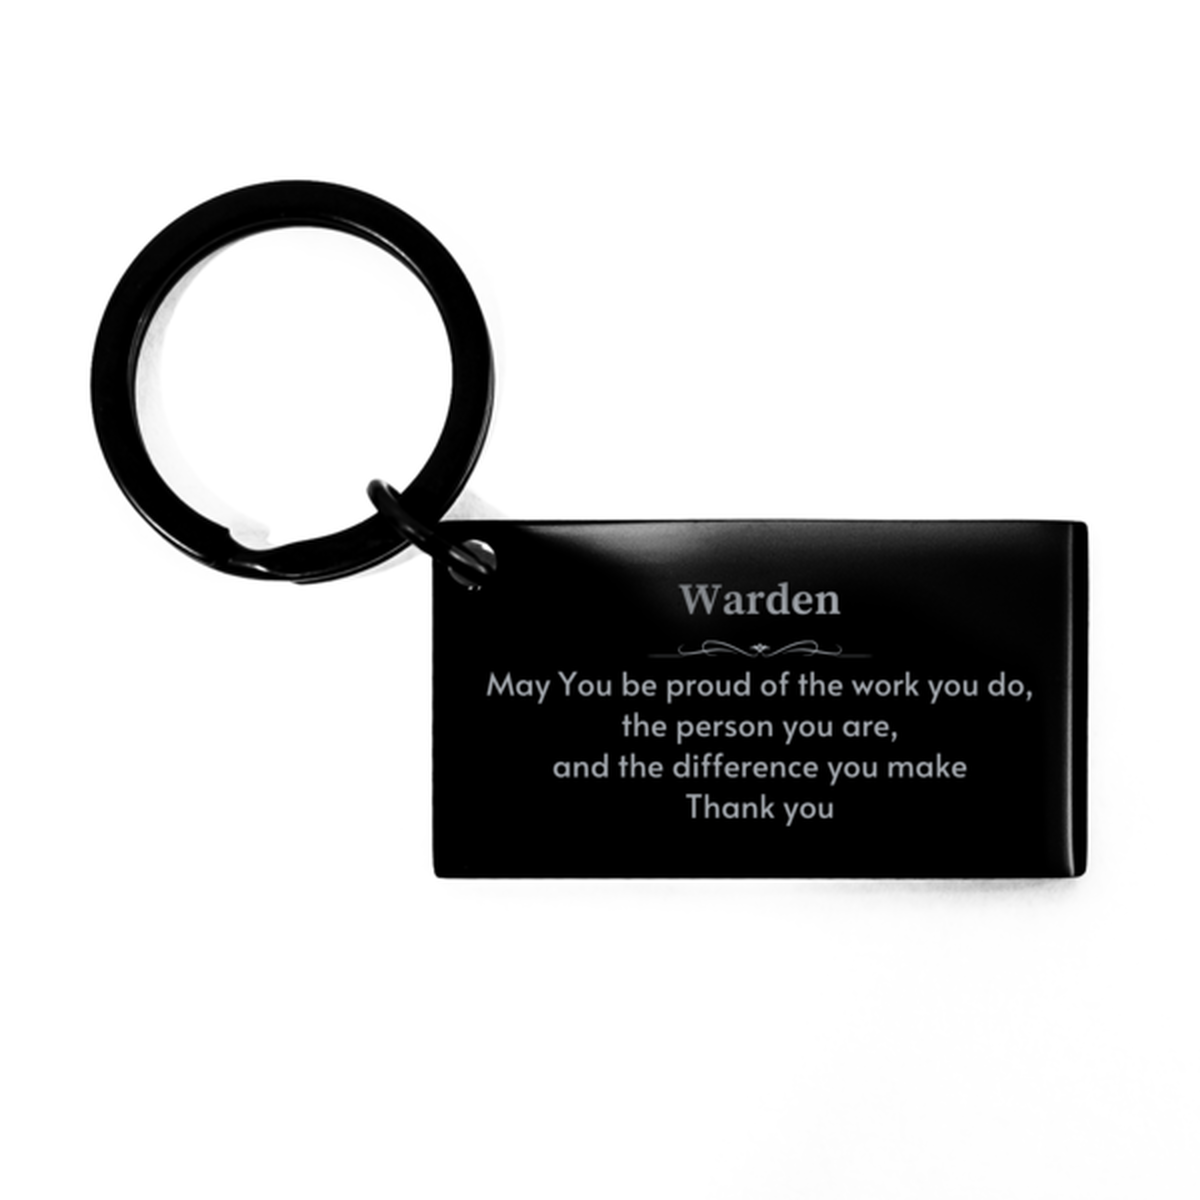 Heartwarming Keychain Retirement Coworkers Gifts for Warden, Archeologist May You be proud of the work you do, the person you are Gifts for Boss Men Women Friends